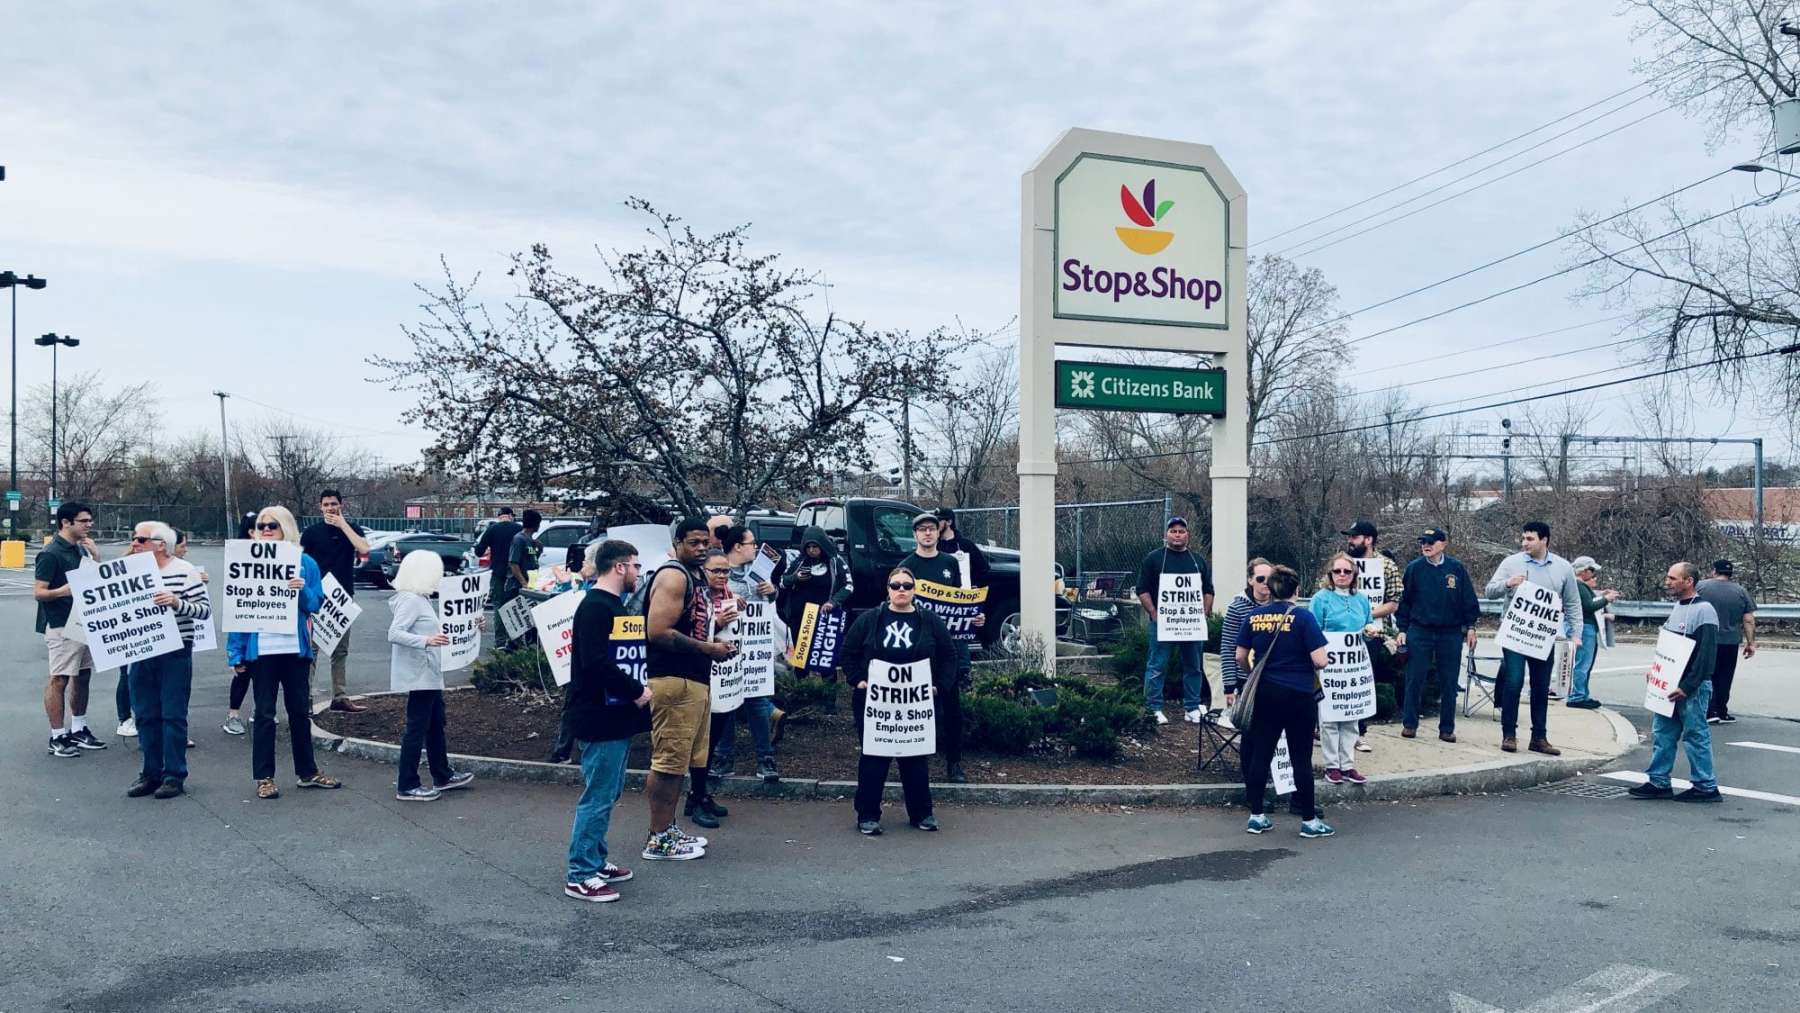 Rhode Island News: An overview of the Stop & Shop strike﻿